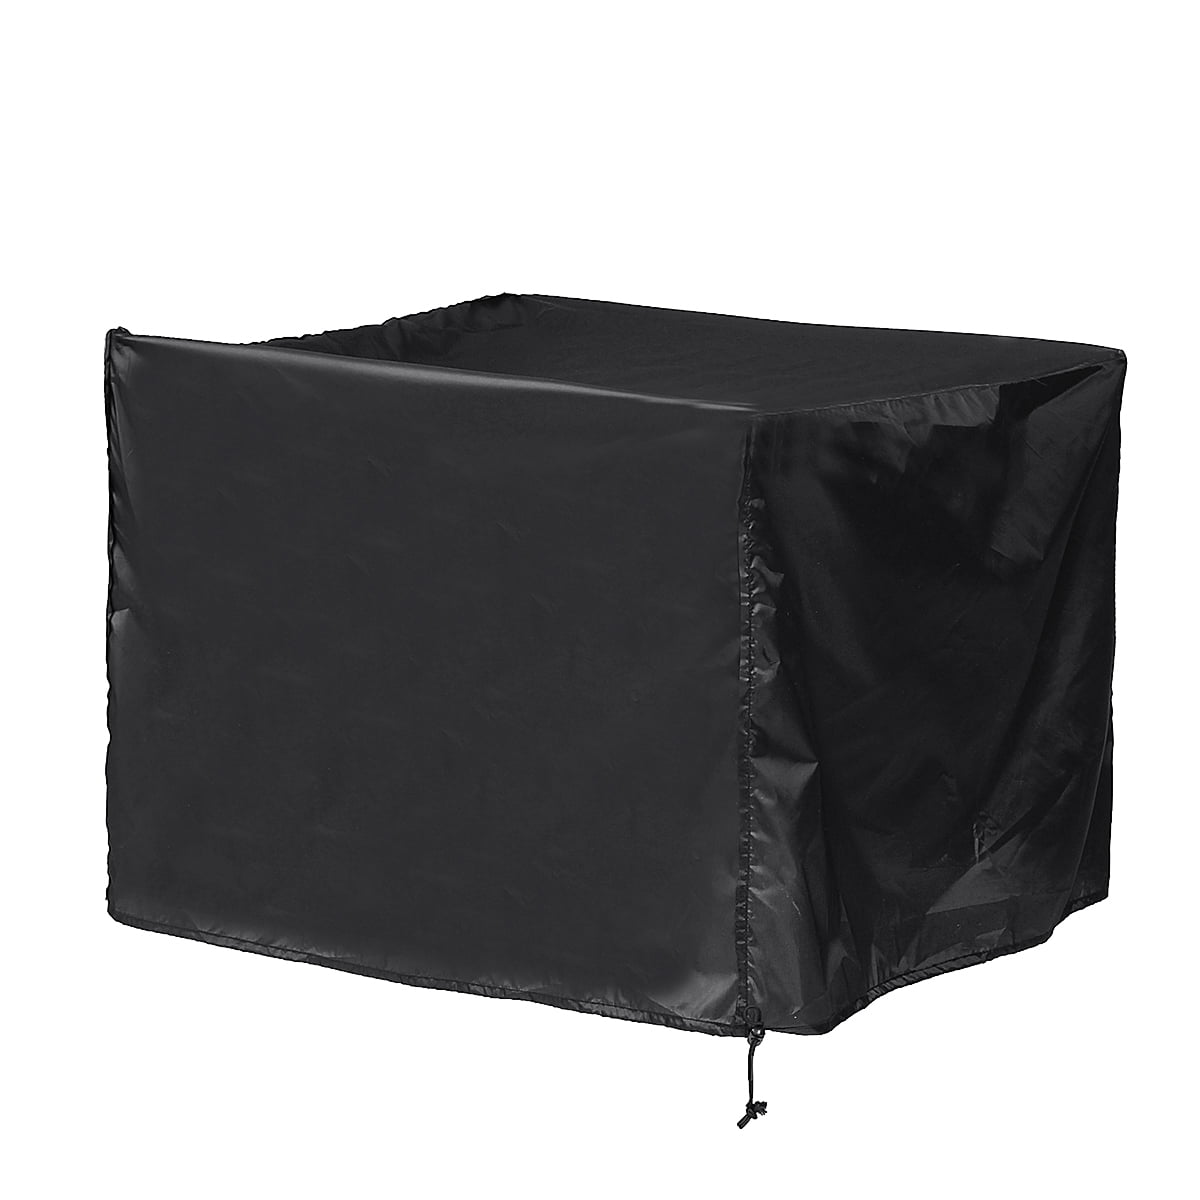 Hot Tub Spa Cover Oxford Fabric Anti-UV Electrical Dust Protector Tubspa Cap A 